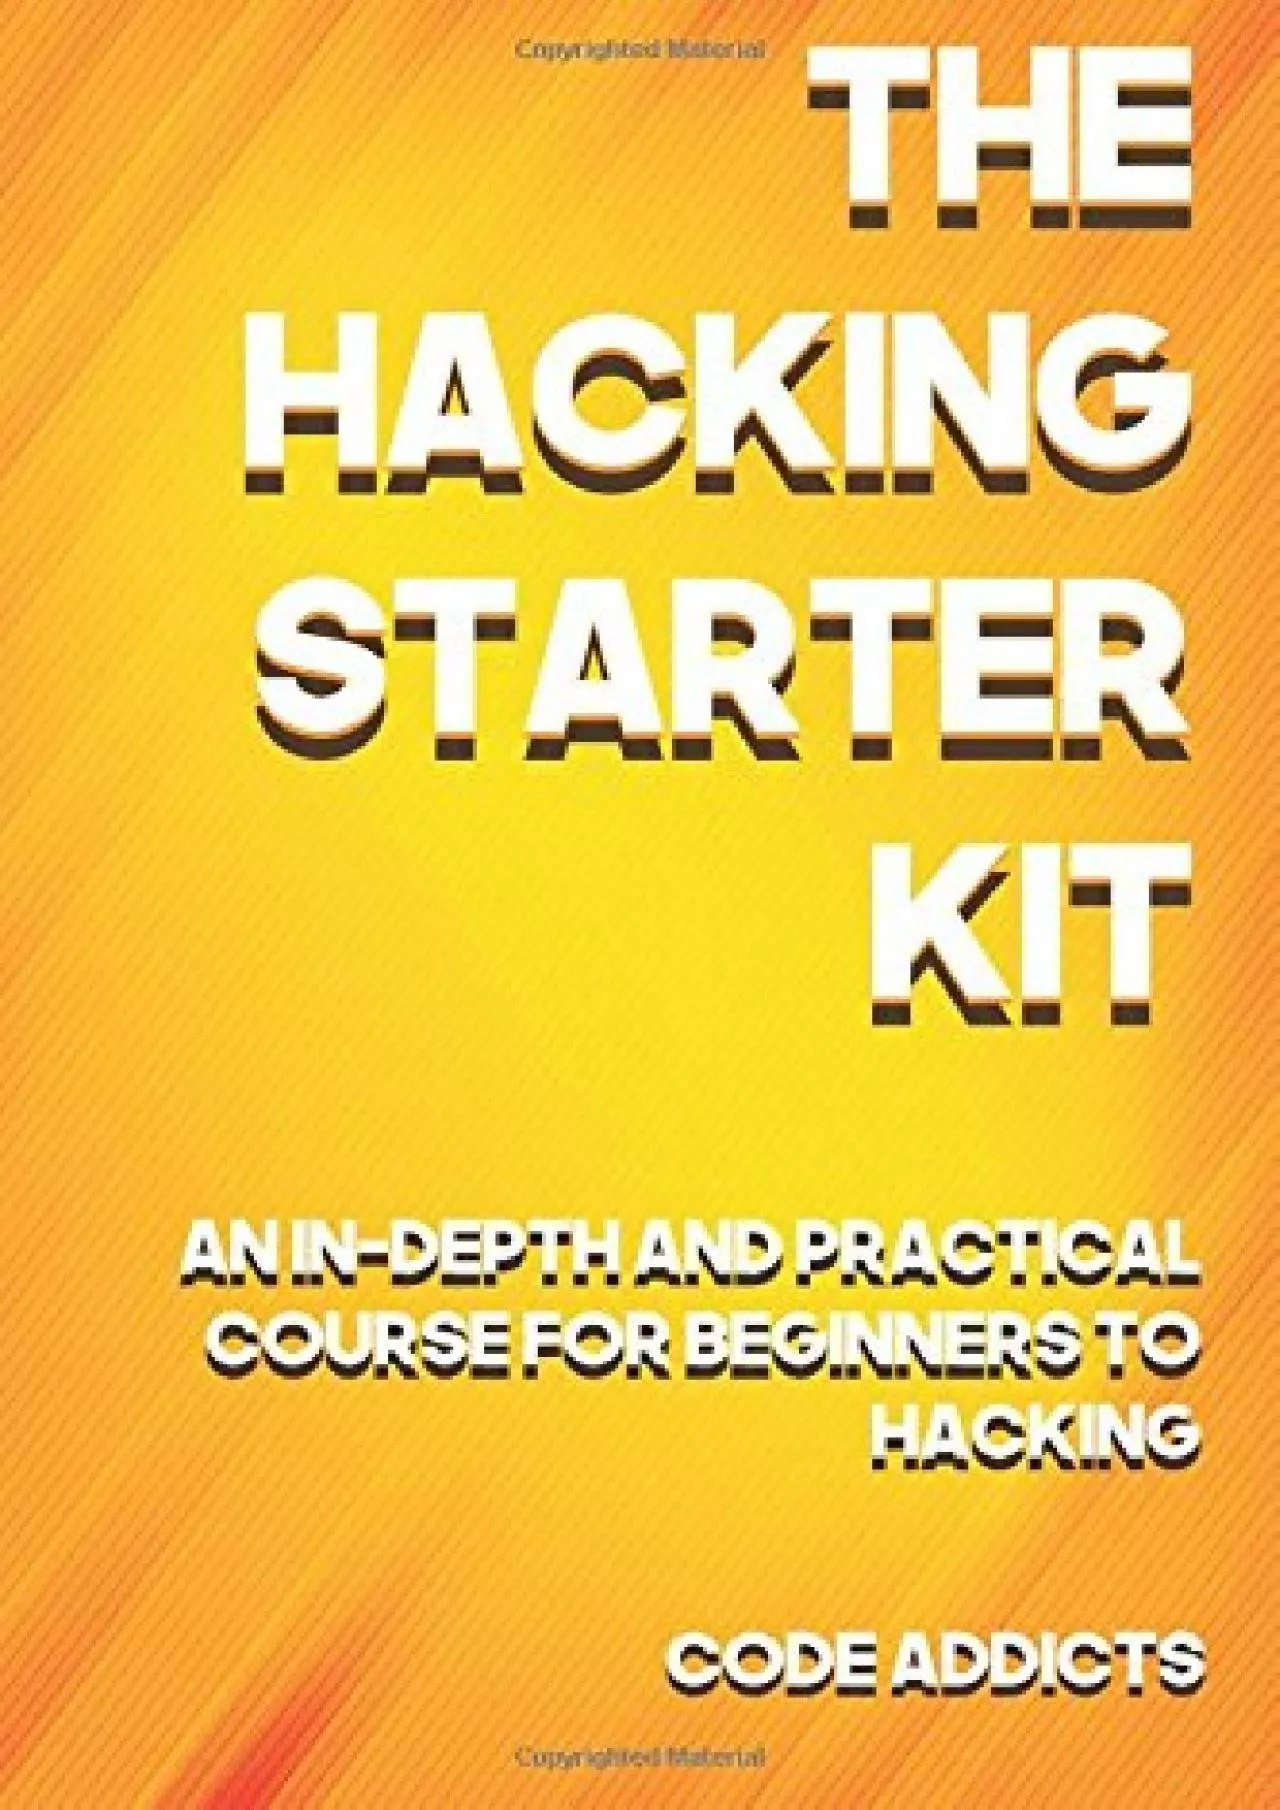 (BOOK)-The Hacking Starter Kit: An In-depth and Practical course for beginners to Ethical